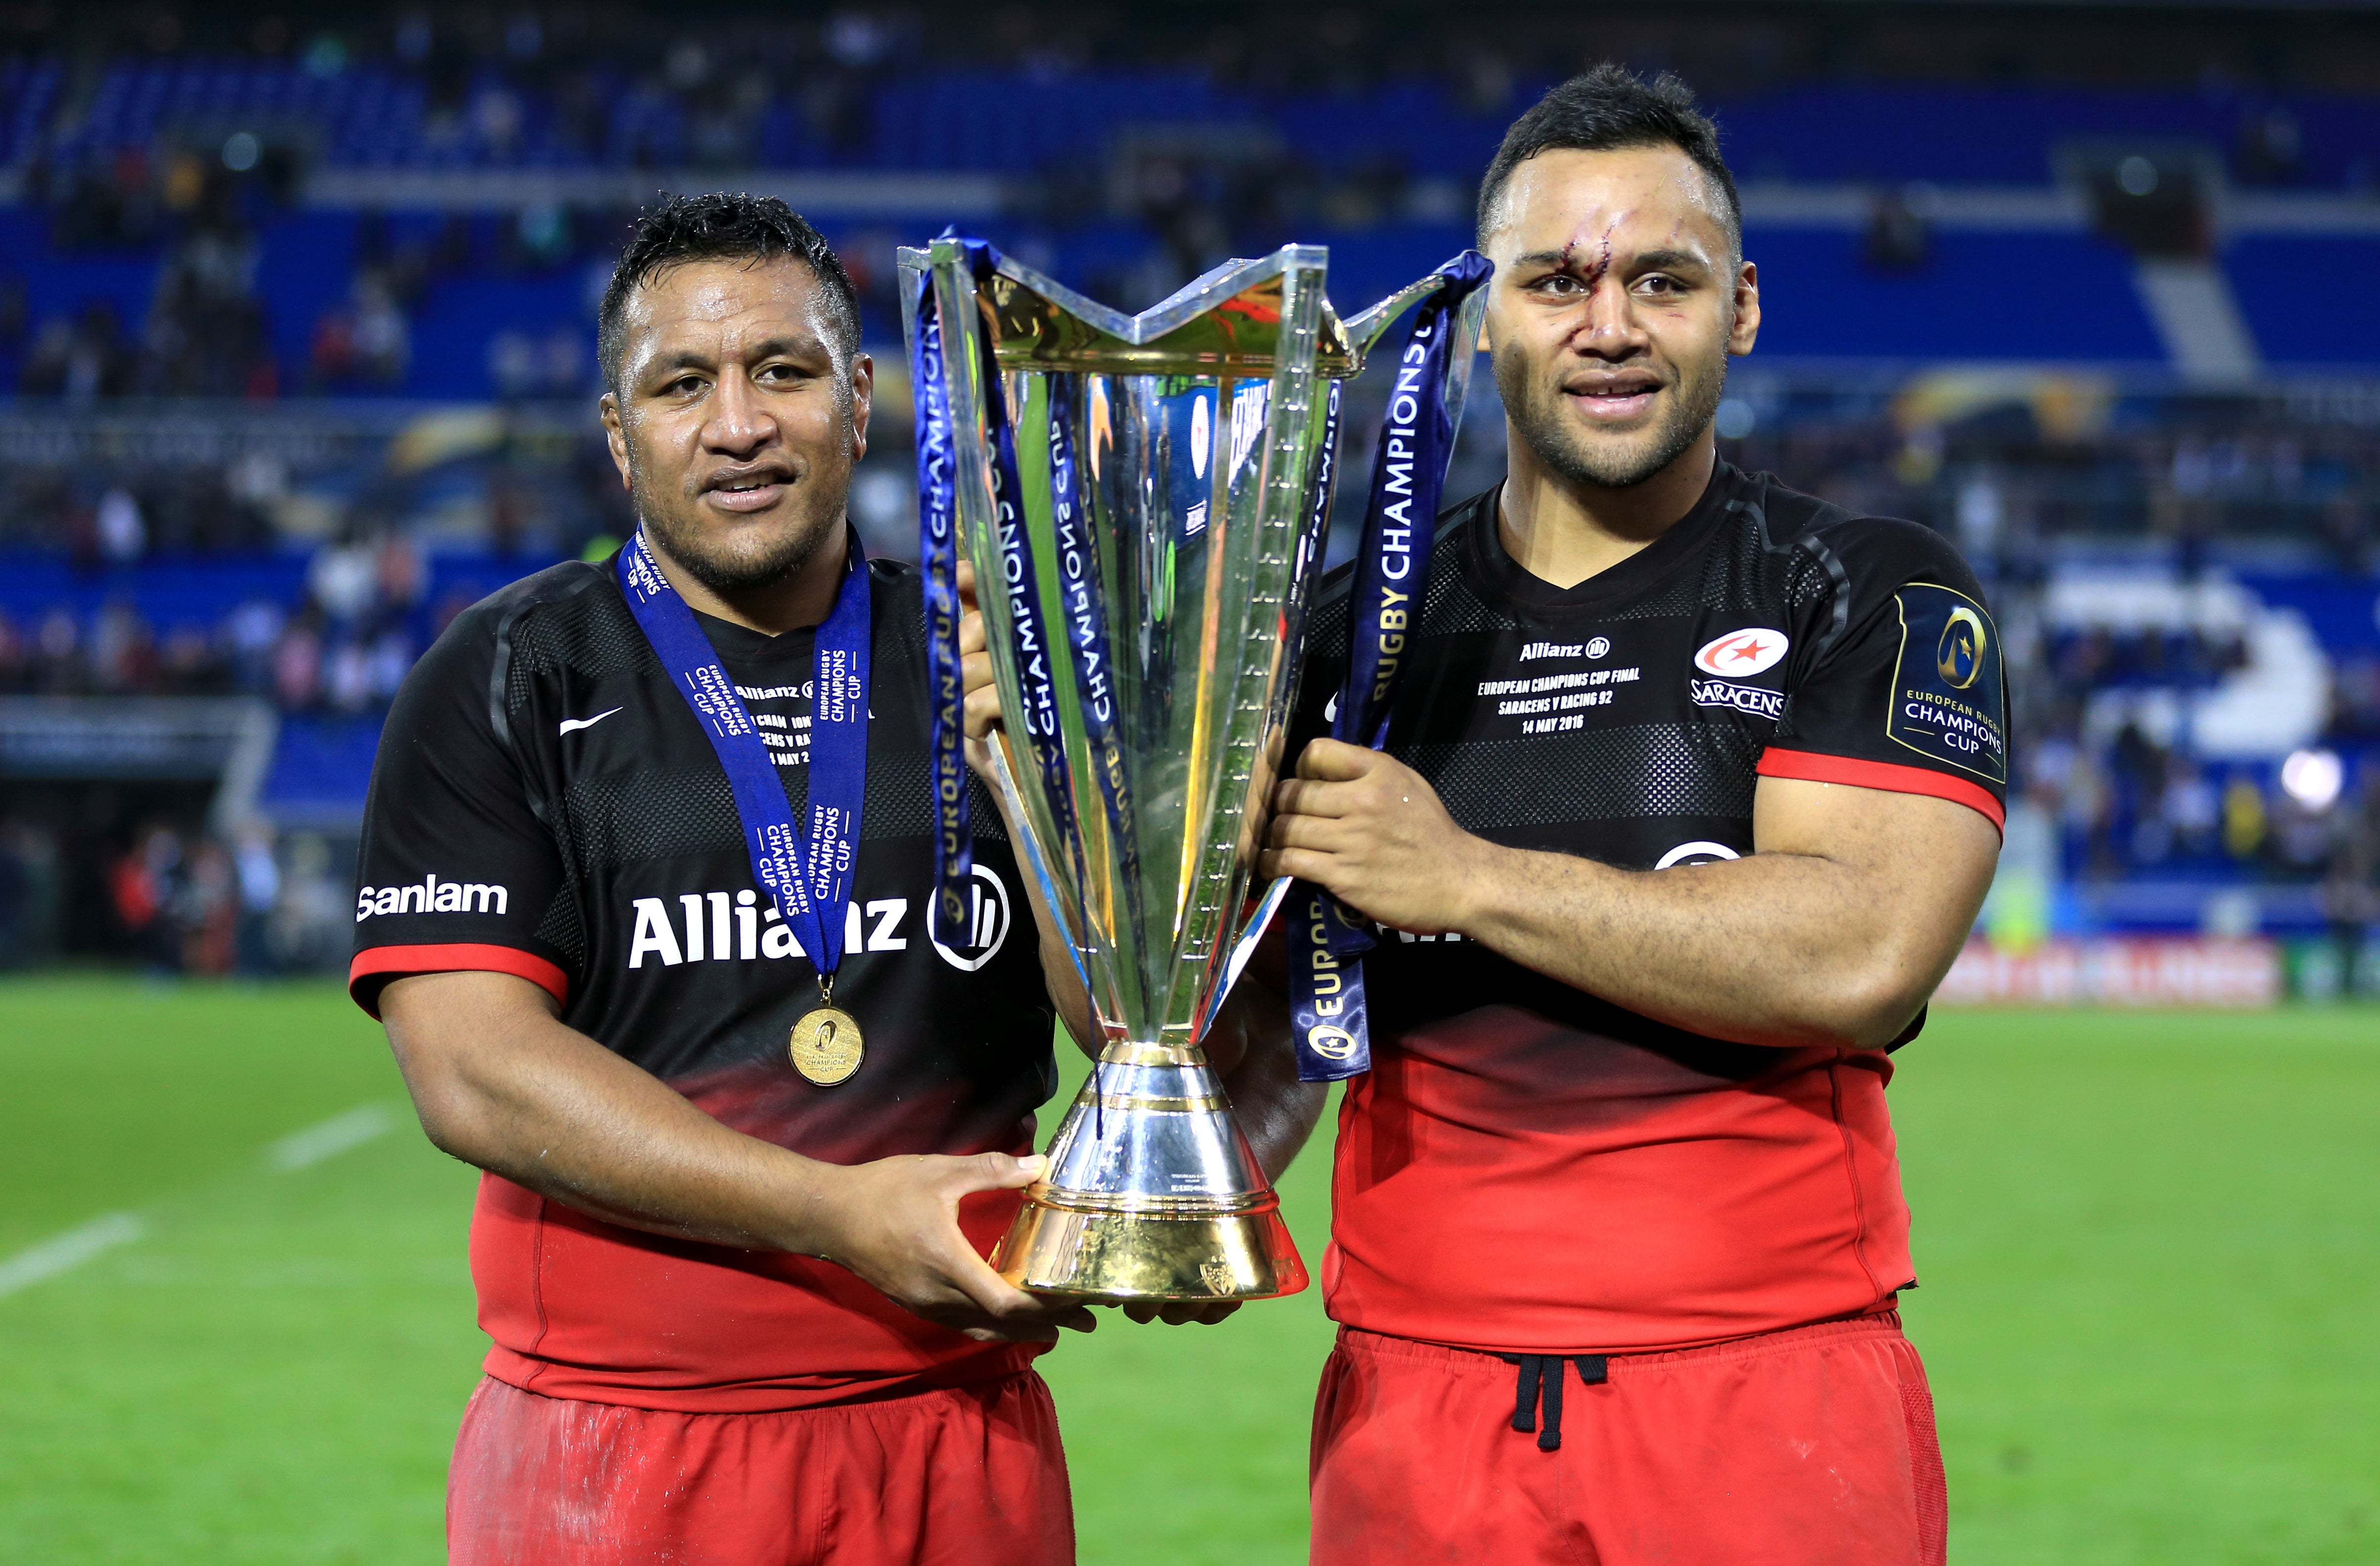 Brothers Mako Vunipola (left) and Billy Vunipola with the Heineken Champions Cup (Adam Davy/PA)